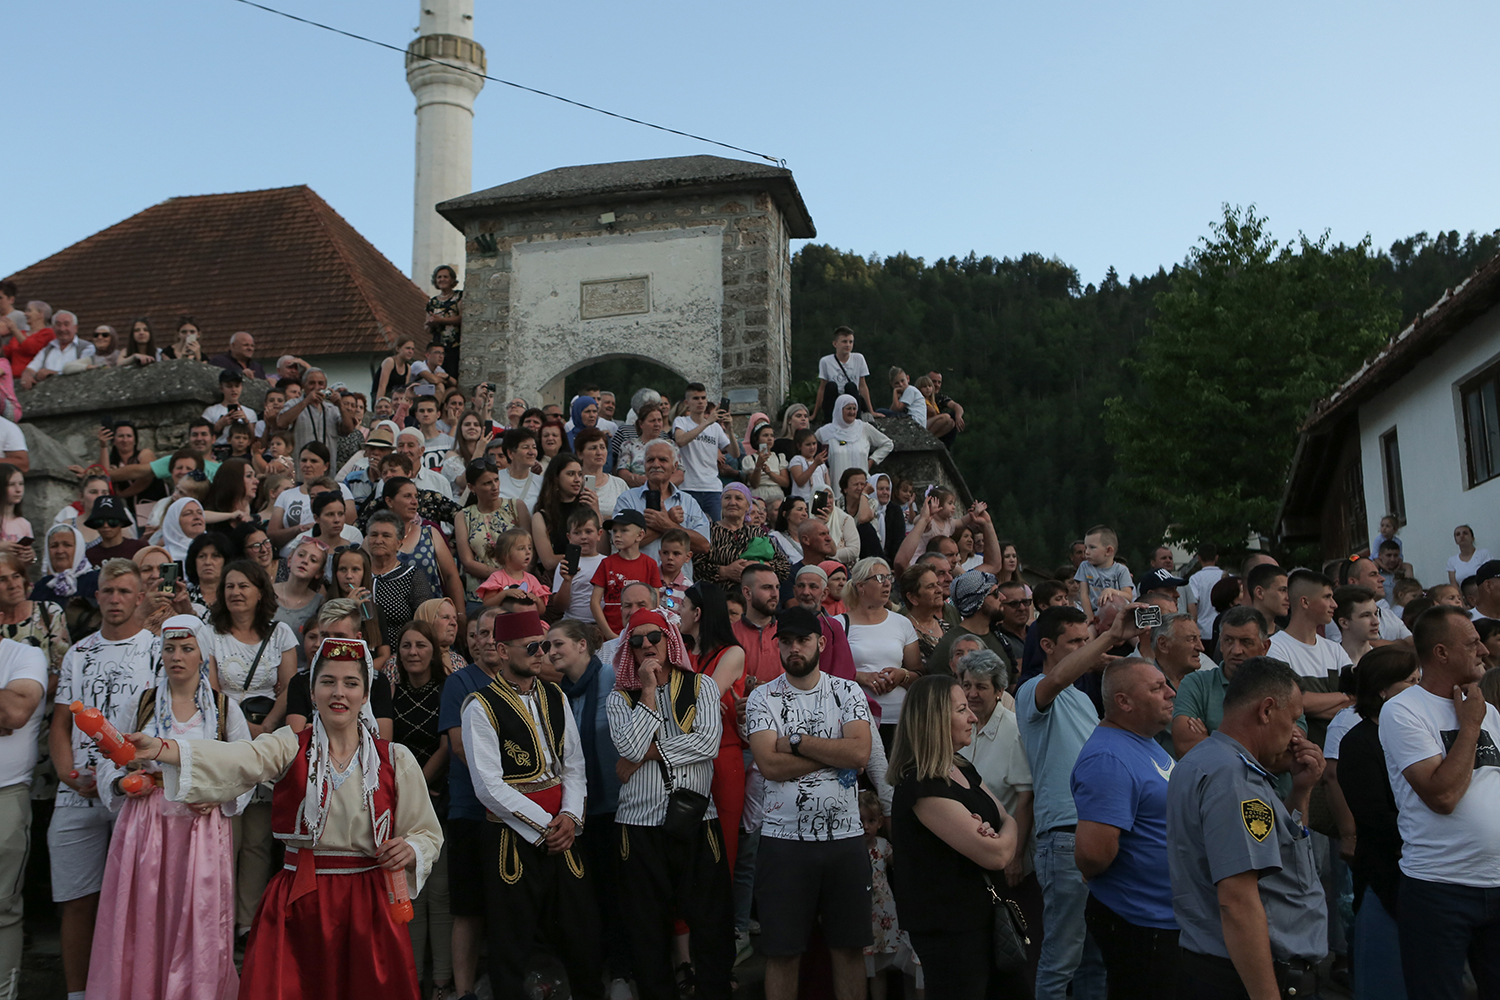 People, some dressed in colourful costumes, gather on the roadside to watch the procession (photo: Konstantin Novakovic)